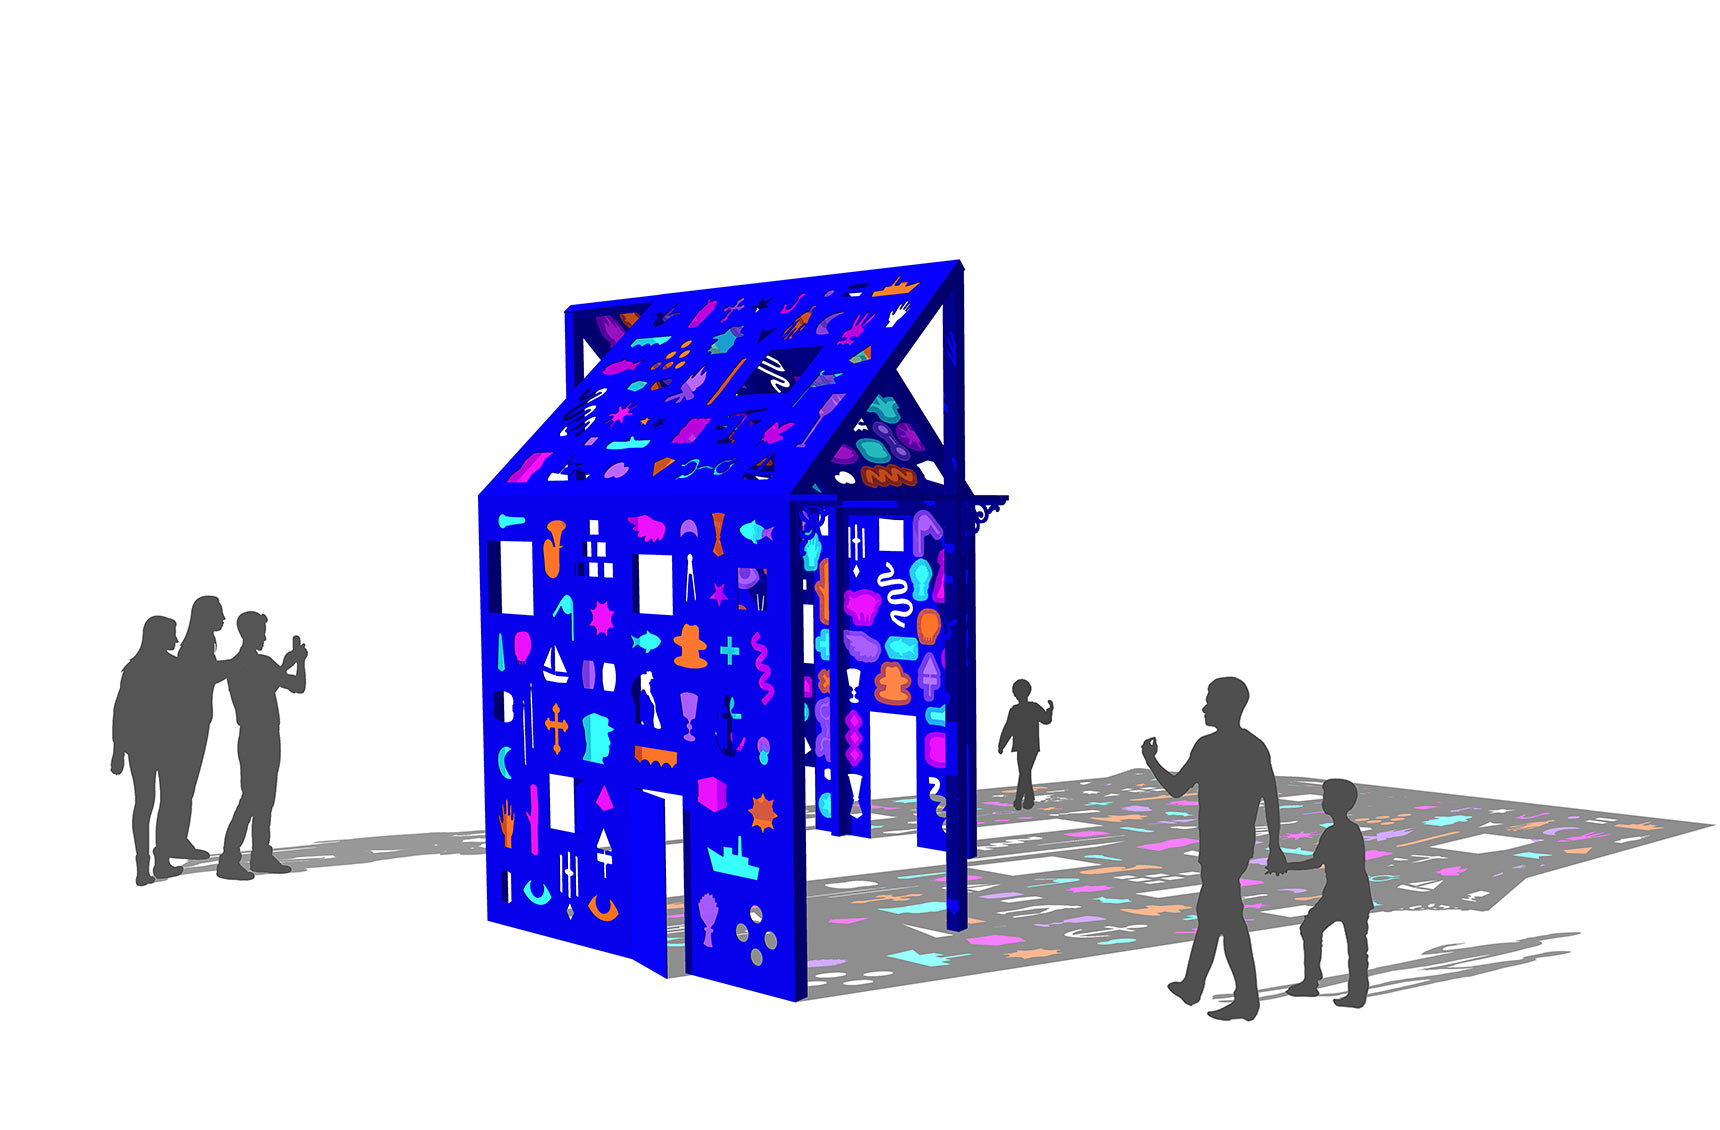 Hieroglyphic House, rendering of a proposed public art installation of a deep blue house-like structure with walls and roofs punctured by windows of shaped iconographic imagery in vibrant colors. Sunlight streaming through these openings casts colorful shadows on the ground.